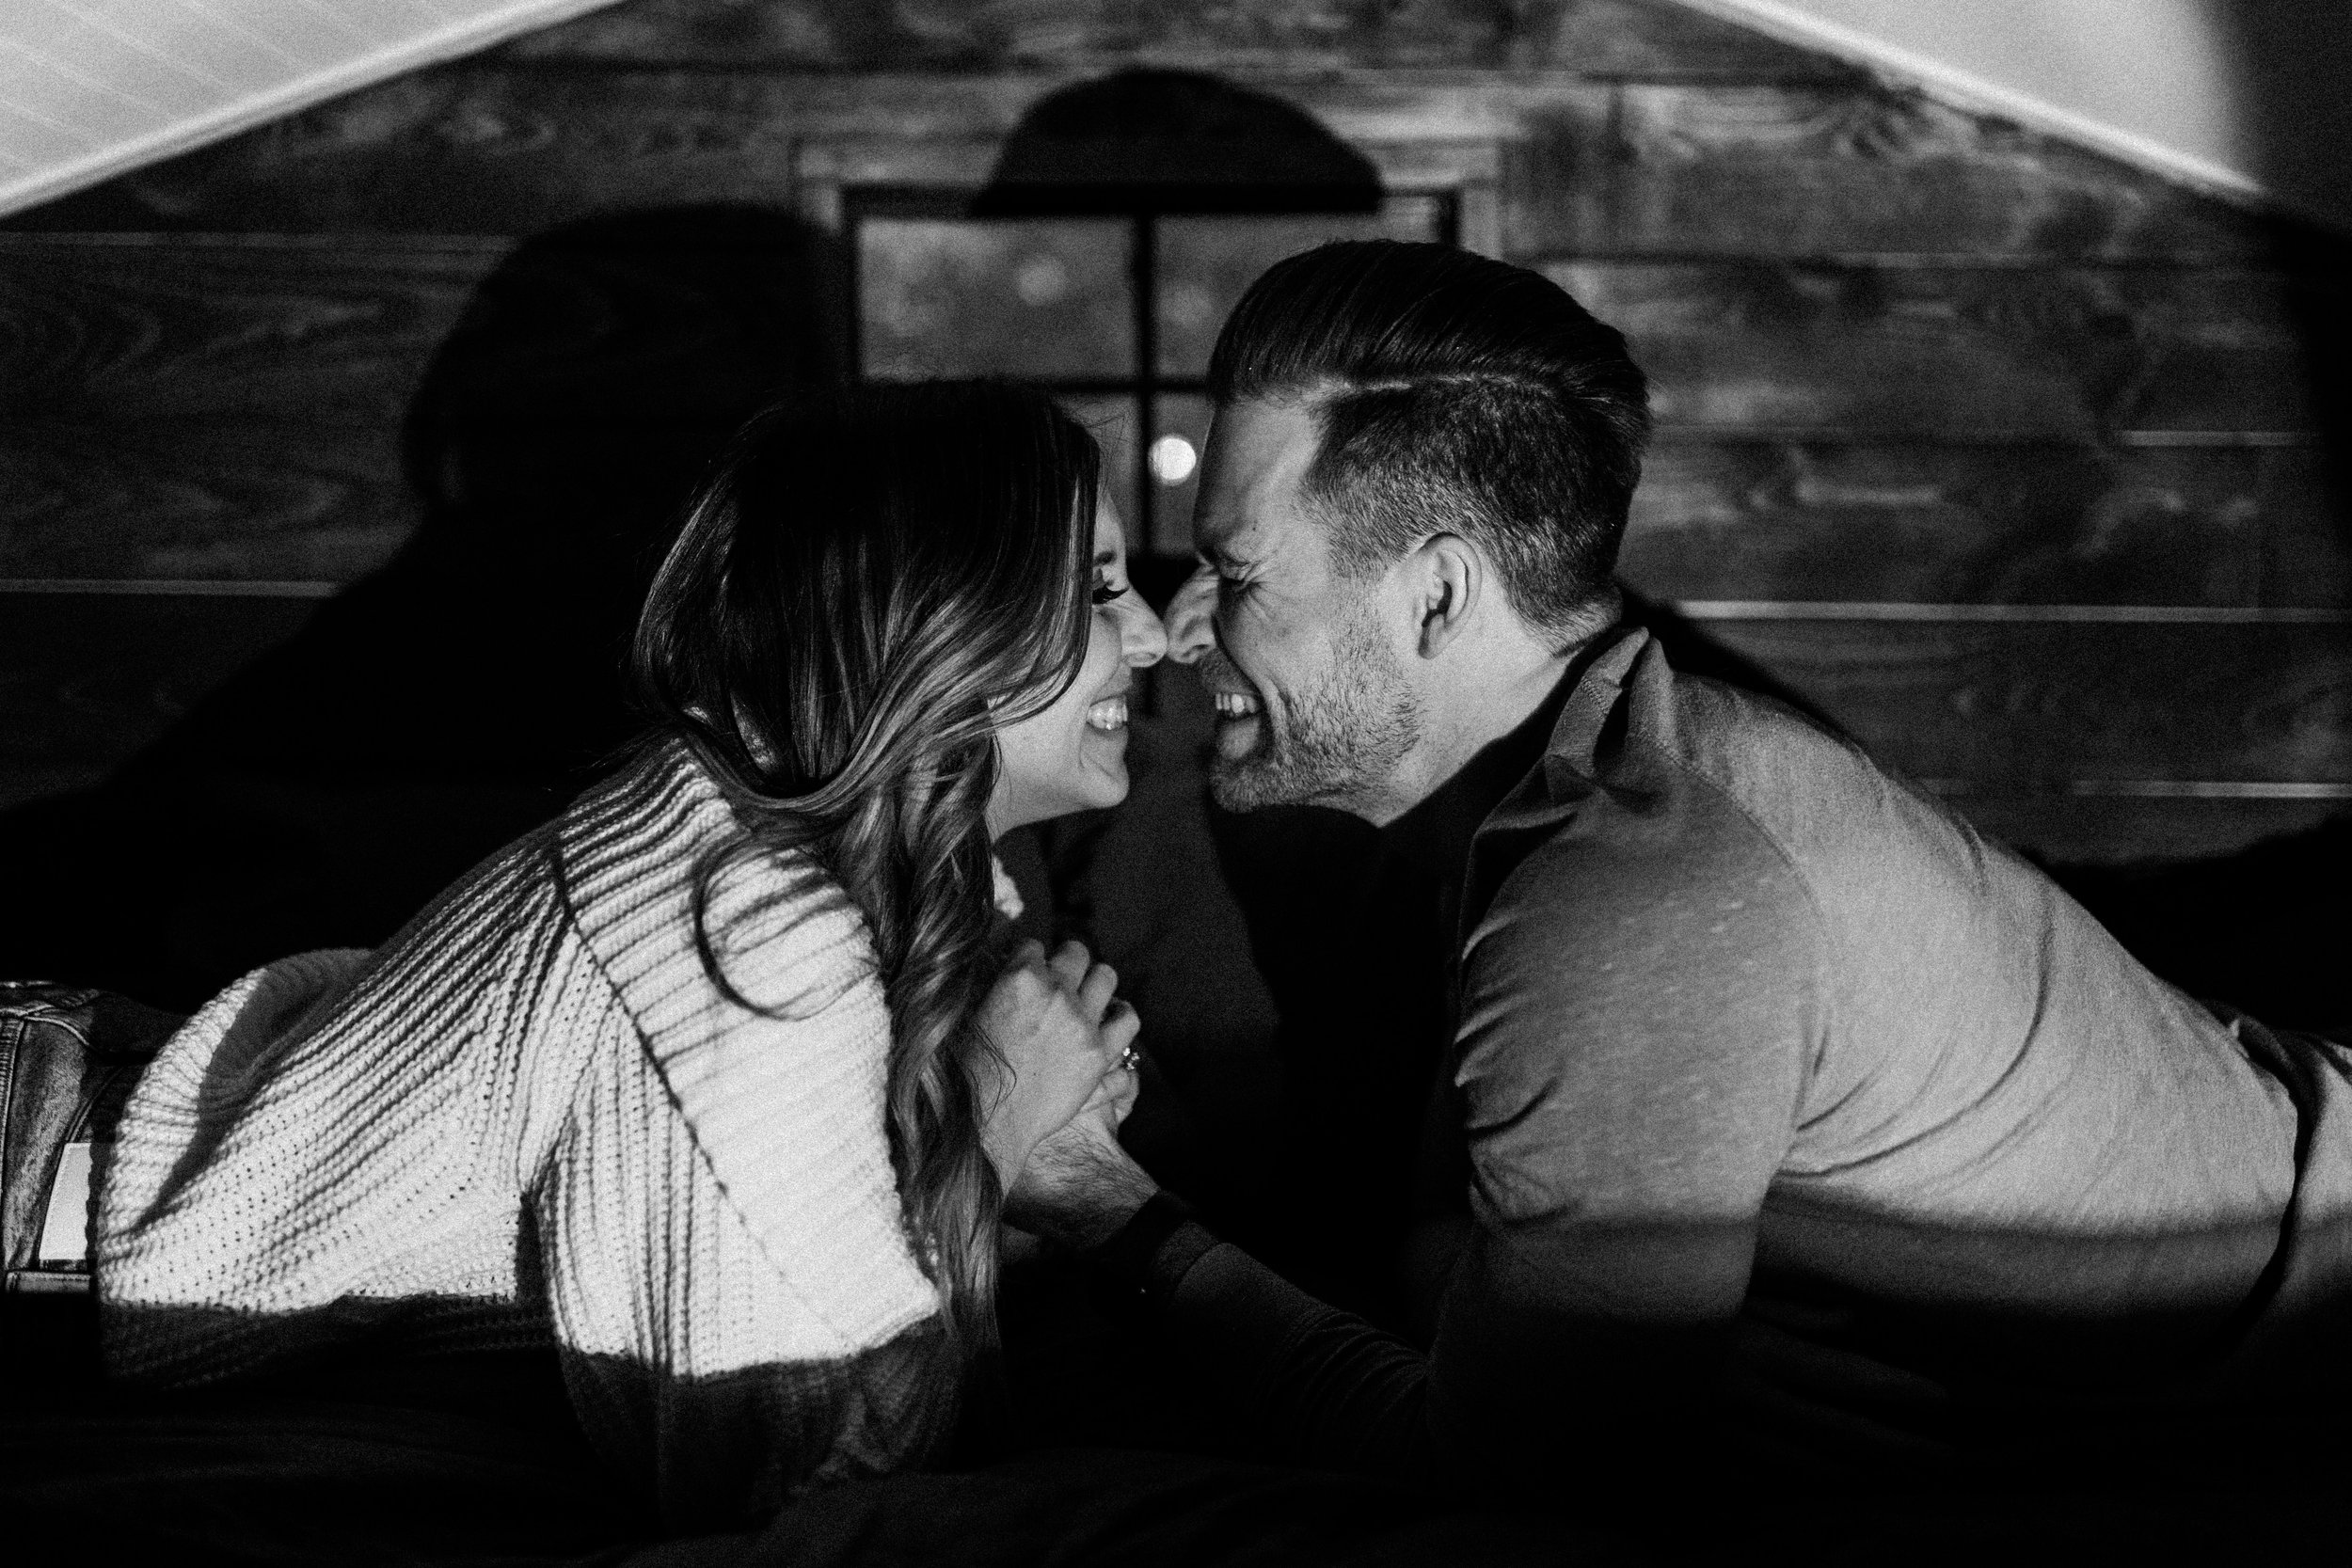 Laura_Ben_Engagment_Session_Winterset_Des_moines_Iowa_Couples_Photographer_Iris_Aisle_Cabin_Conservatory_Candid_Snow_Day_Winter_KMP_Photography-1582.jpg